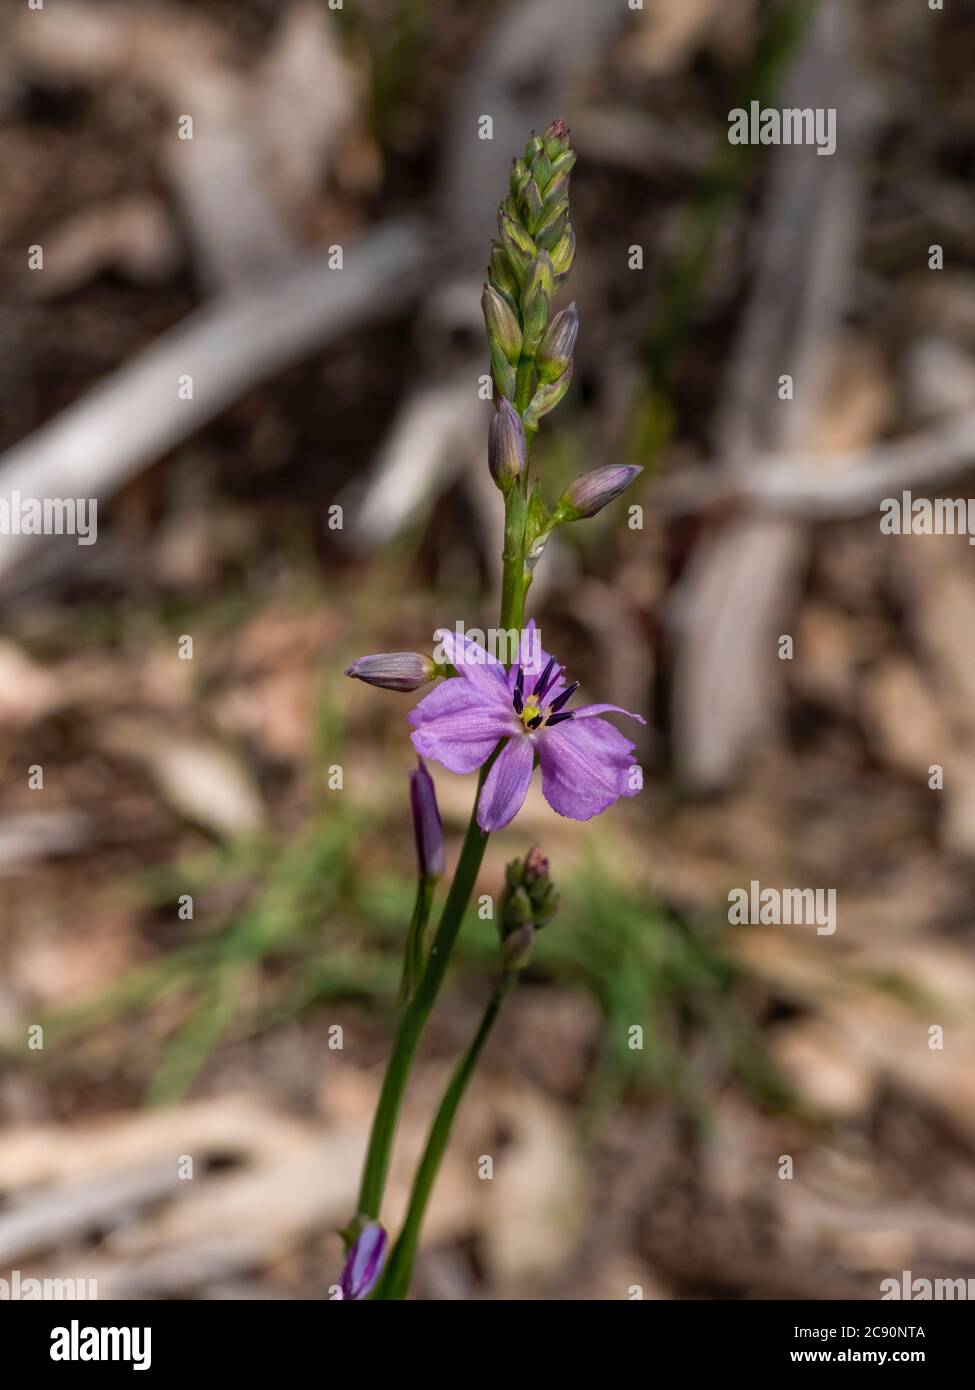 The flower of the Australian native plant known as a Chocolate Lily (Arthropodium strictum) Stock Photo